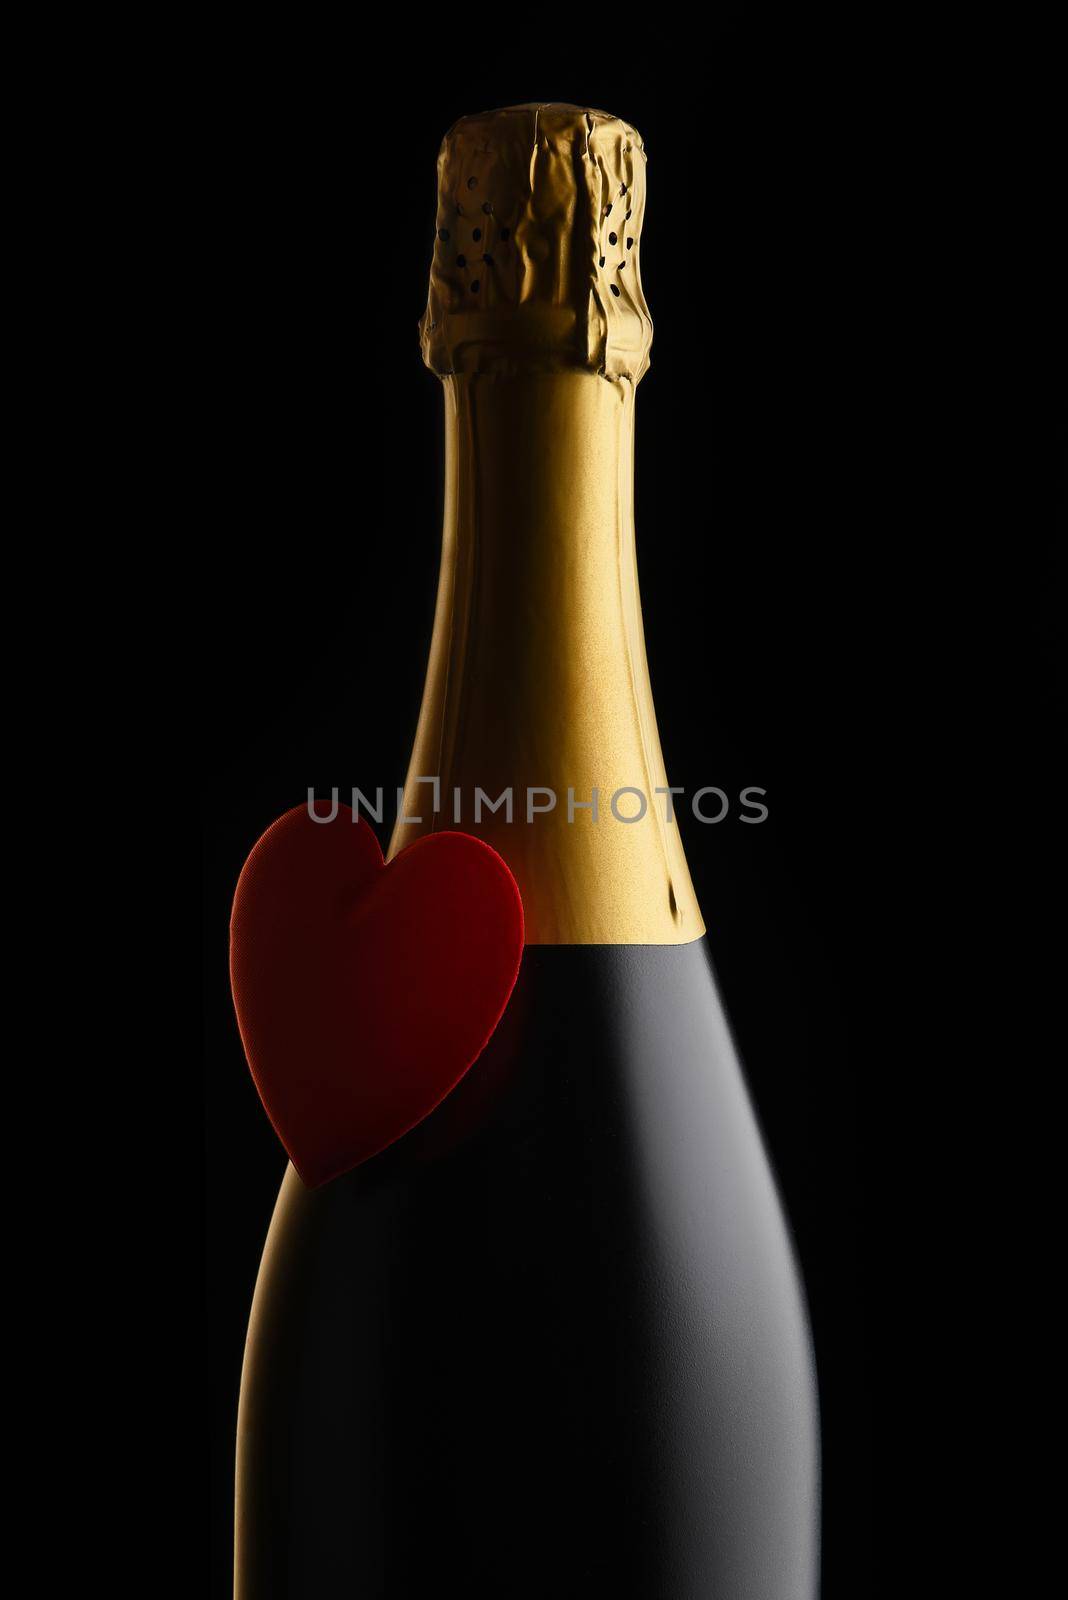 Valentines Day Concept: Closeup of a bottle of Champagne with a red heart against a black background.